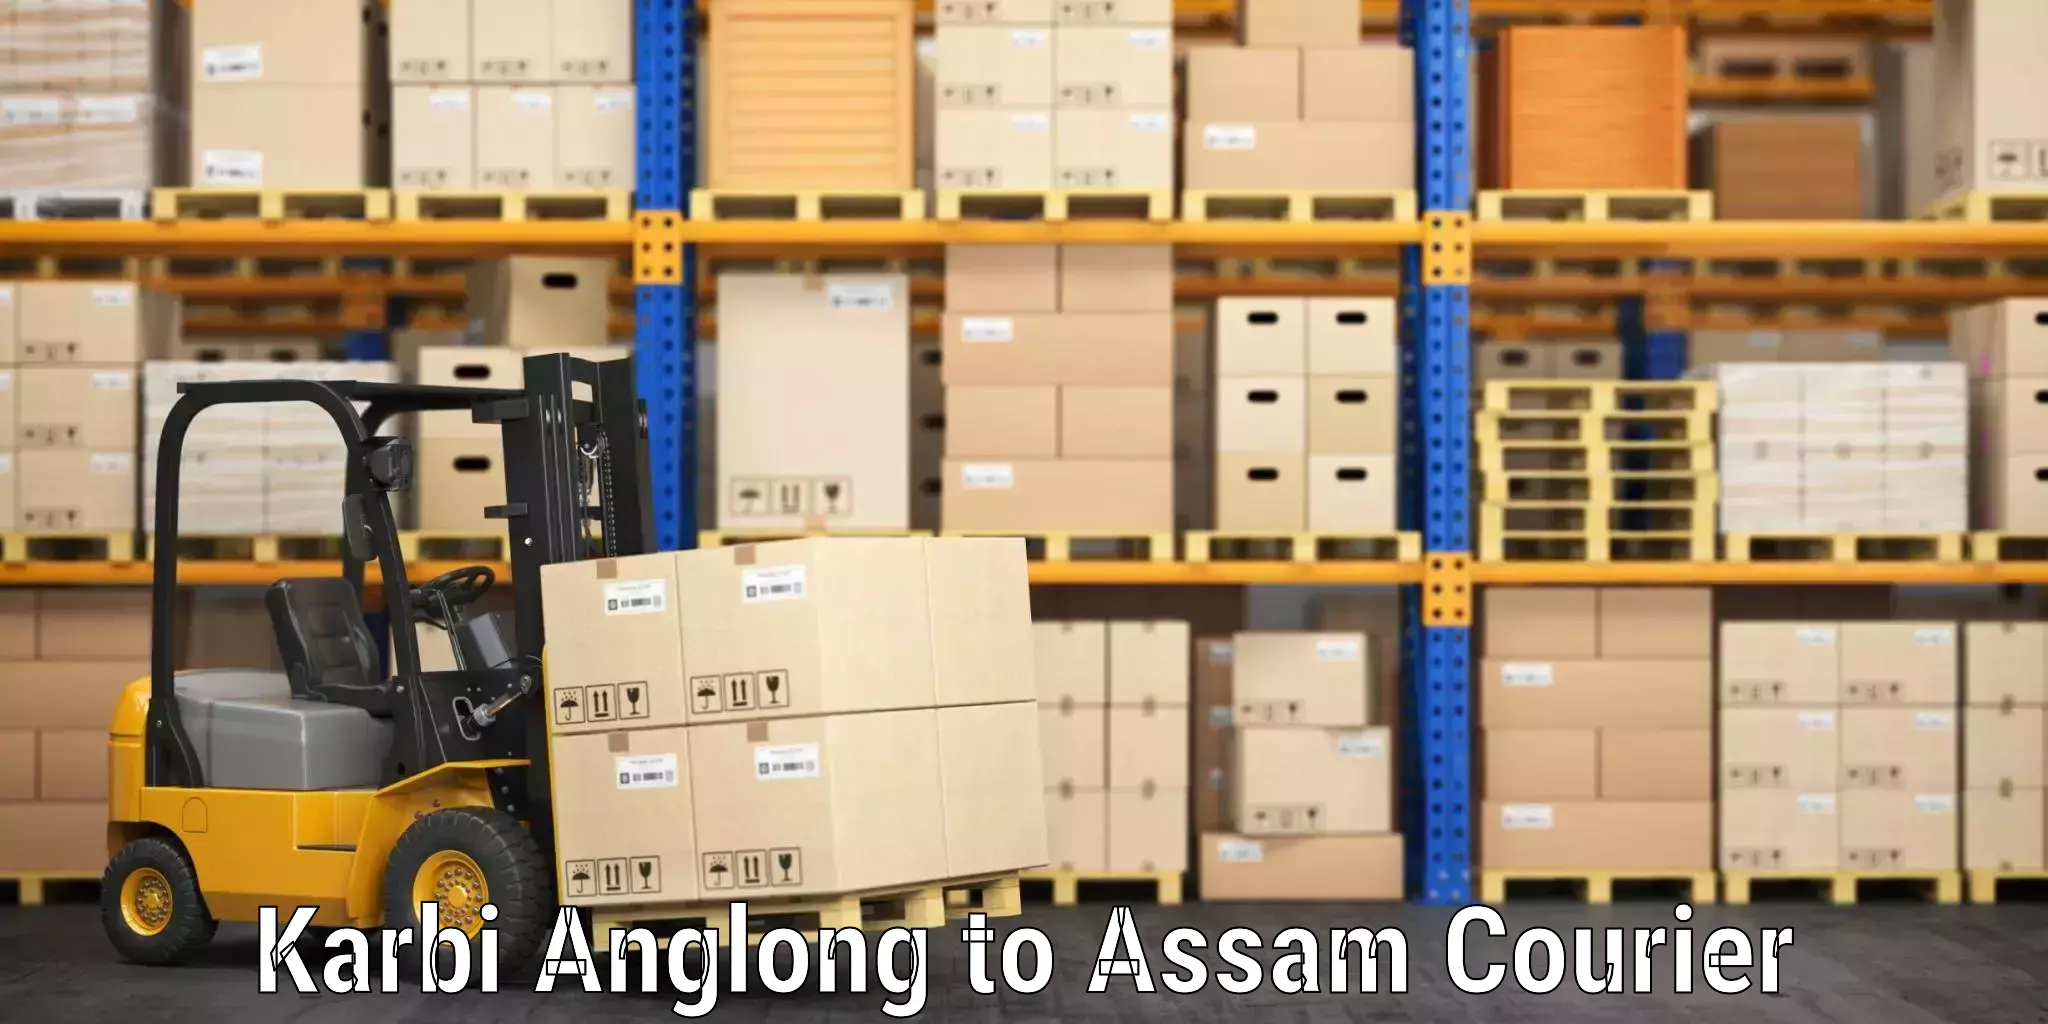 Baggage shipping experts Karbi Anglong to Assam